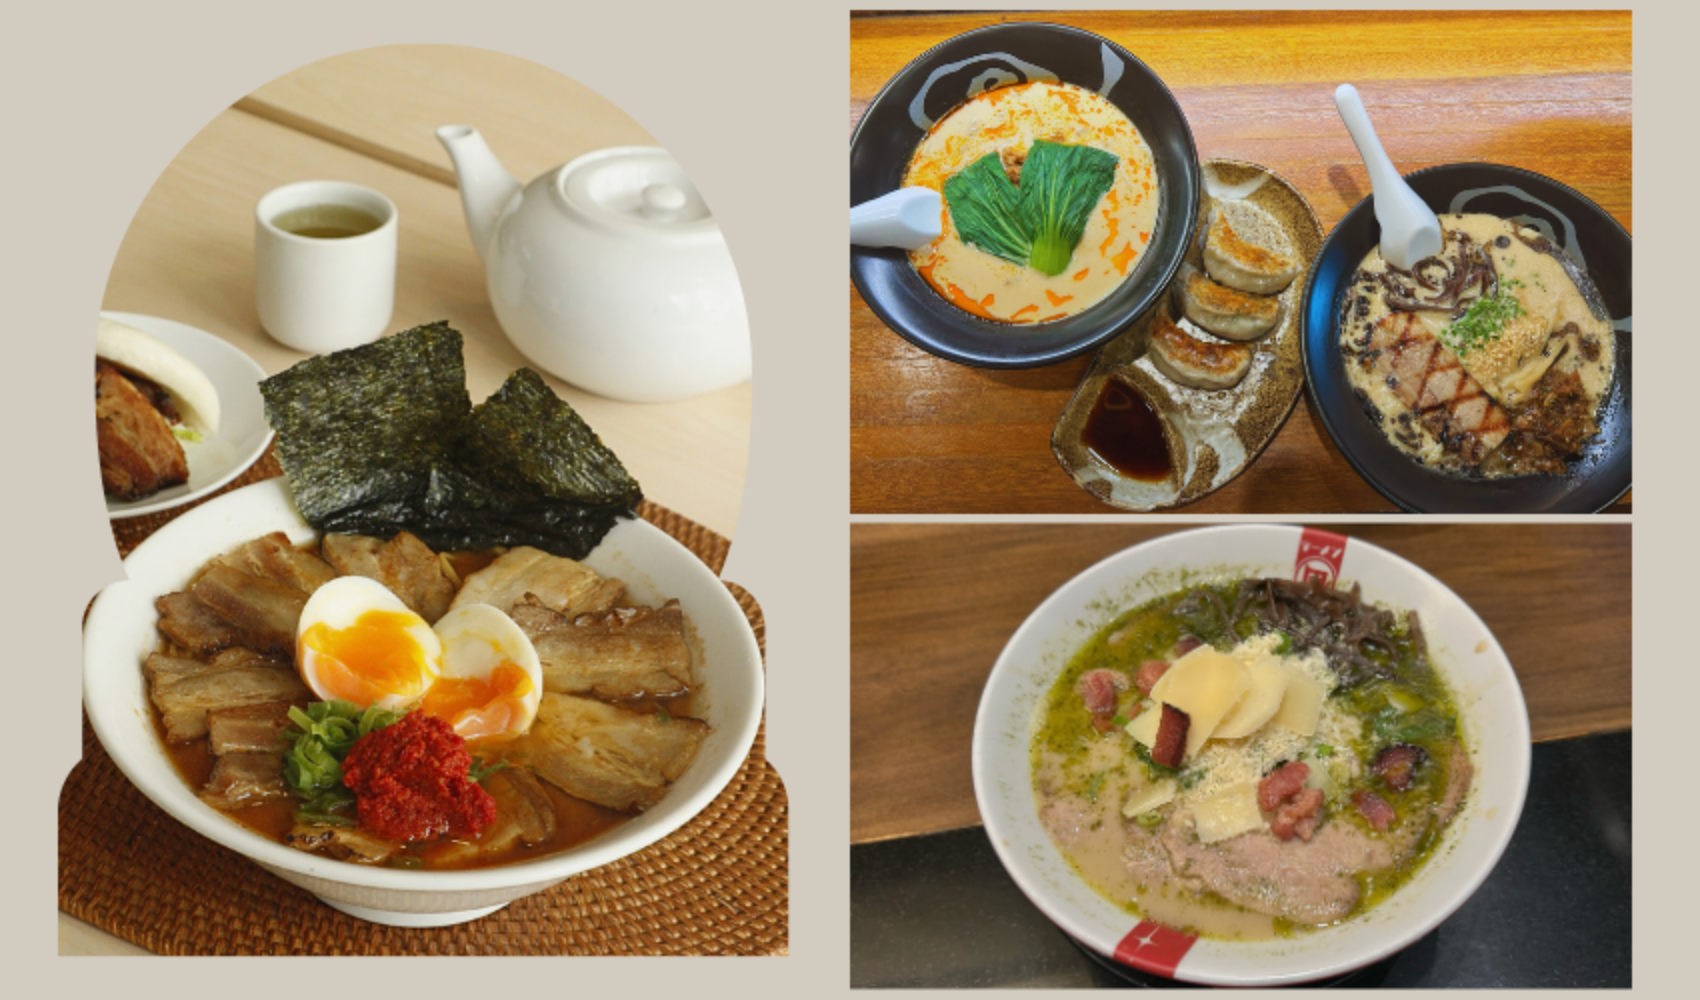 Where to Eat the Best Ramen in MOA? Here’s a Guide to Help